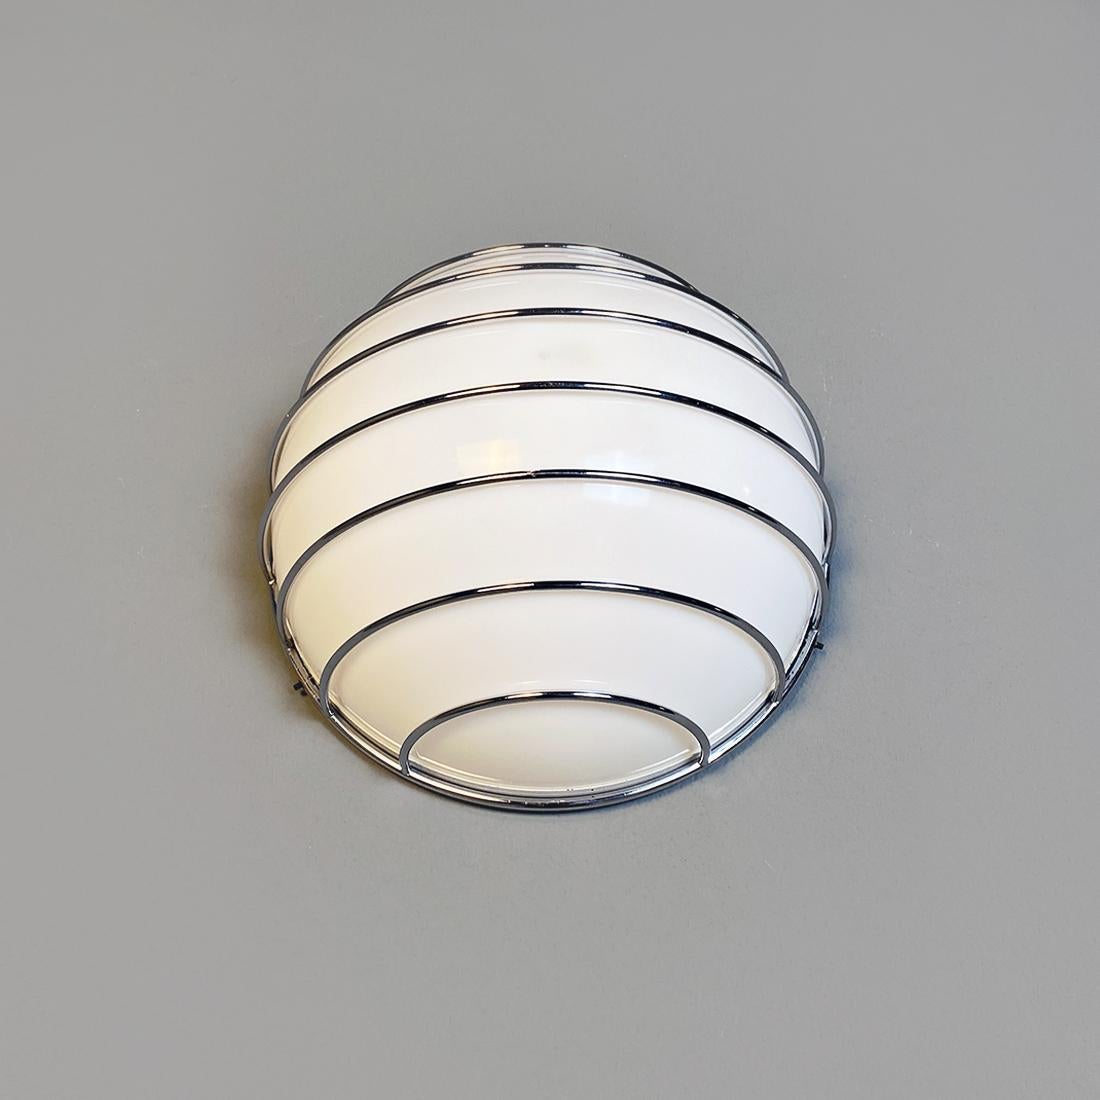 Italian Modern Metal Rod Structure and White Plastic Lampshade Wall Lamp, 1970s For Sale 3